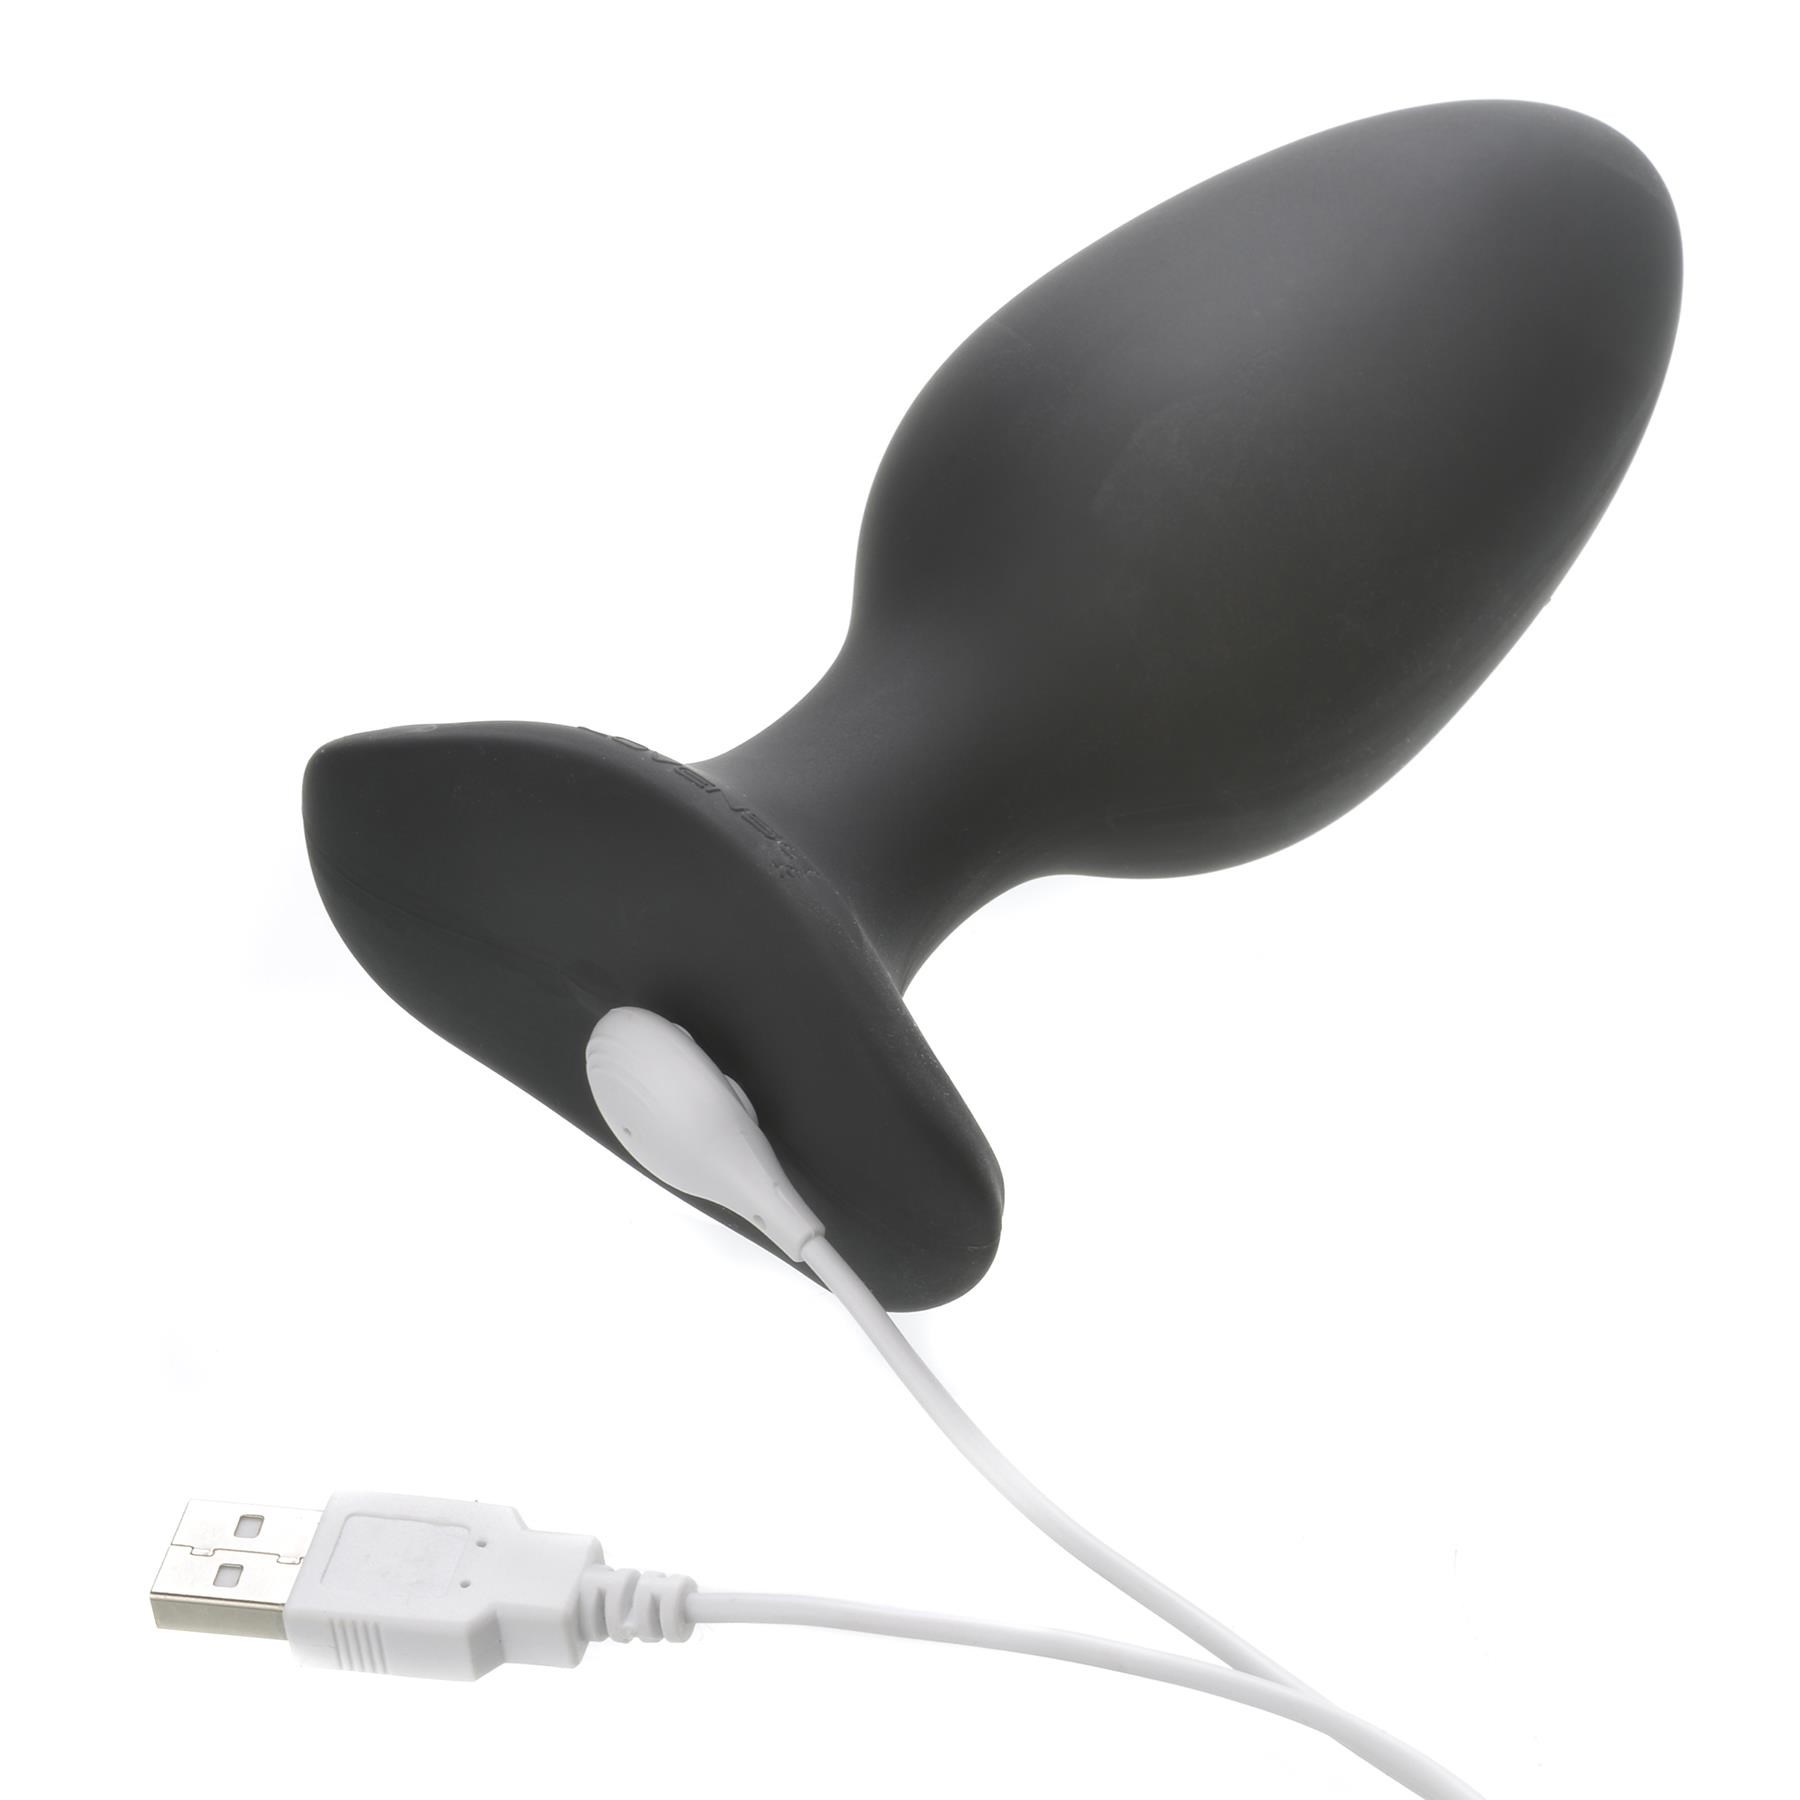 Lovense Hush 2 Bluetooth Vibrating Butt Plug- Showing Where Charging Cable is Placed